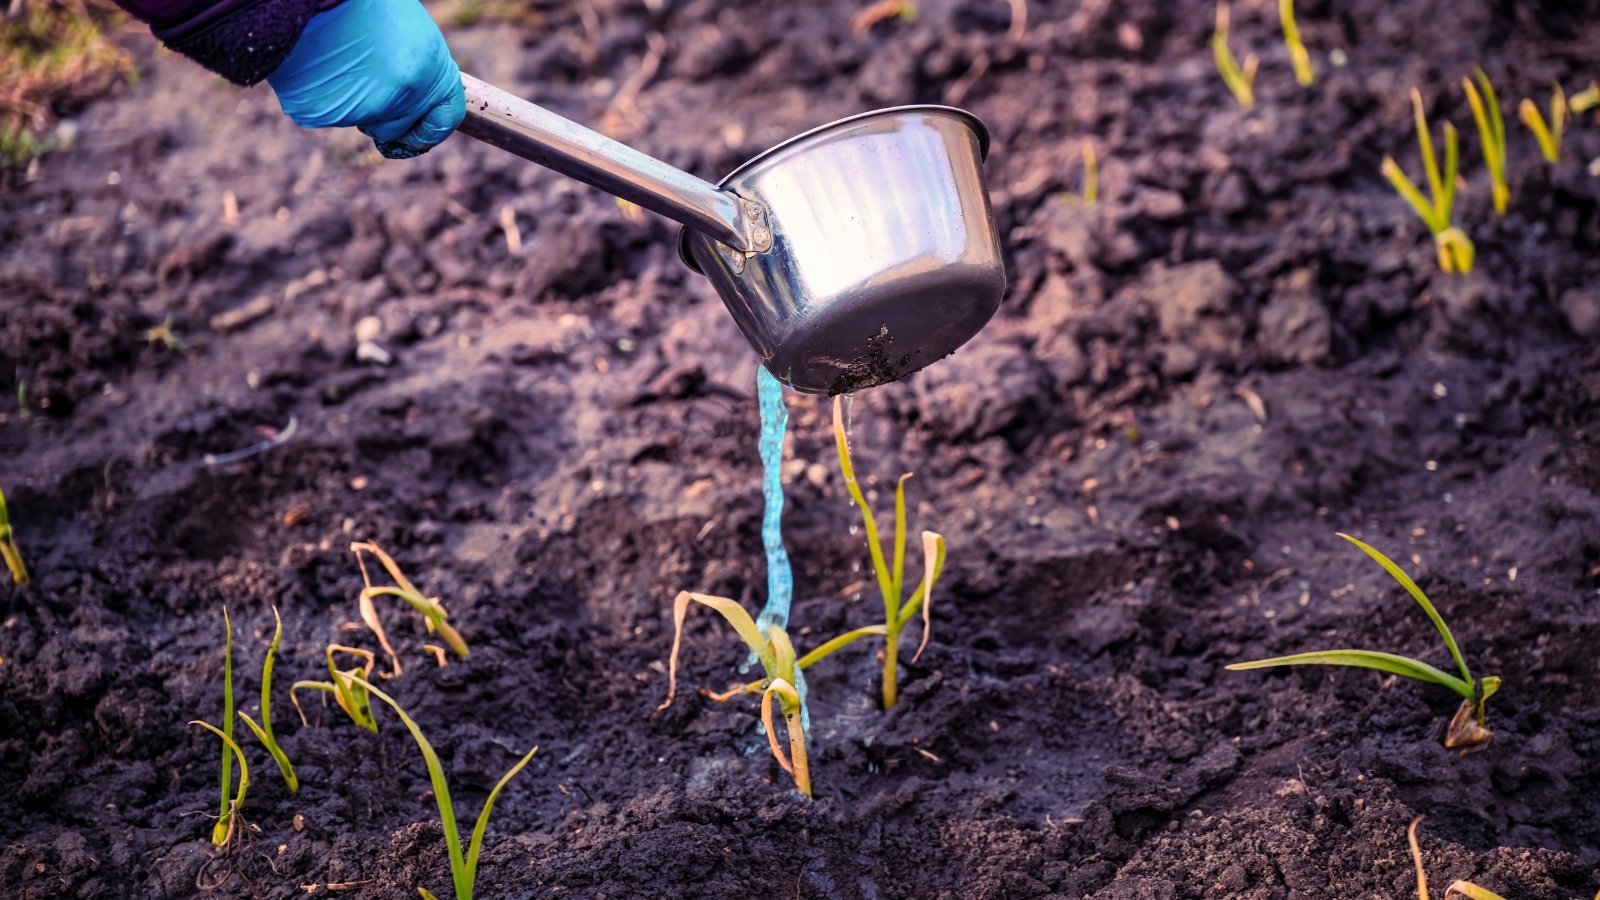 Close-up of a gardener's gloved hand carefully applying a vibrant blue liquid fertilizer from an iron bowl onto a bed of growing onions.  